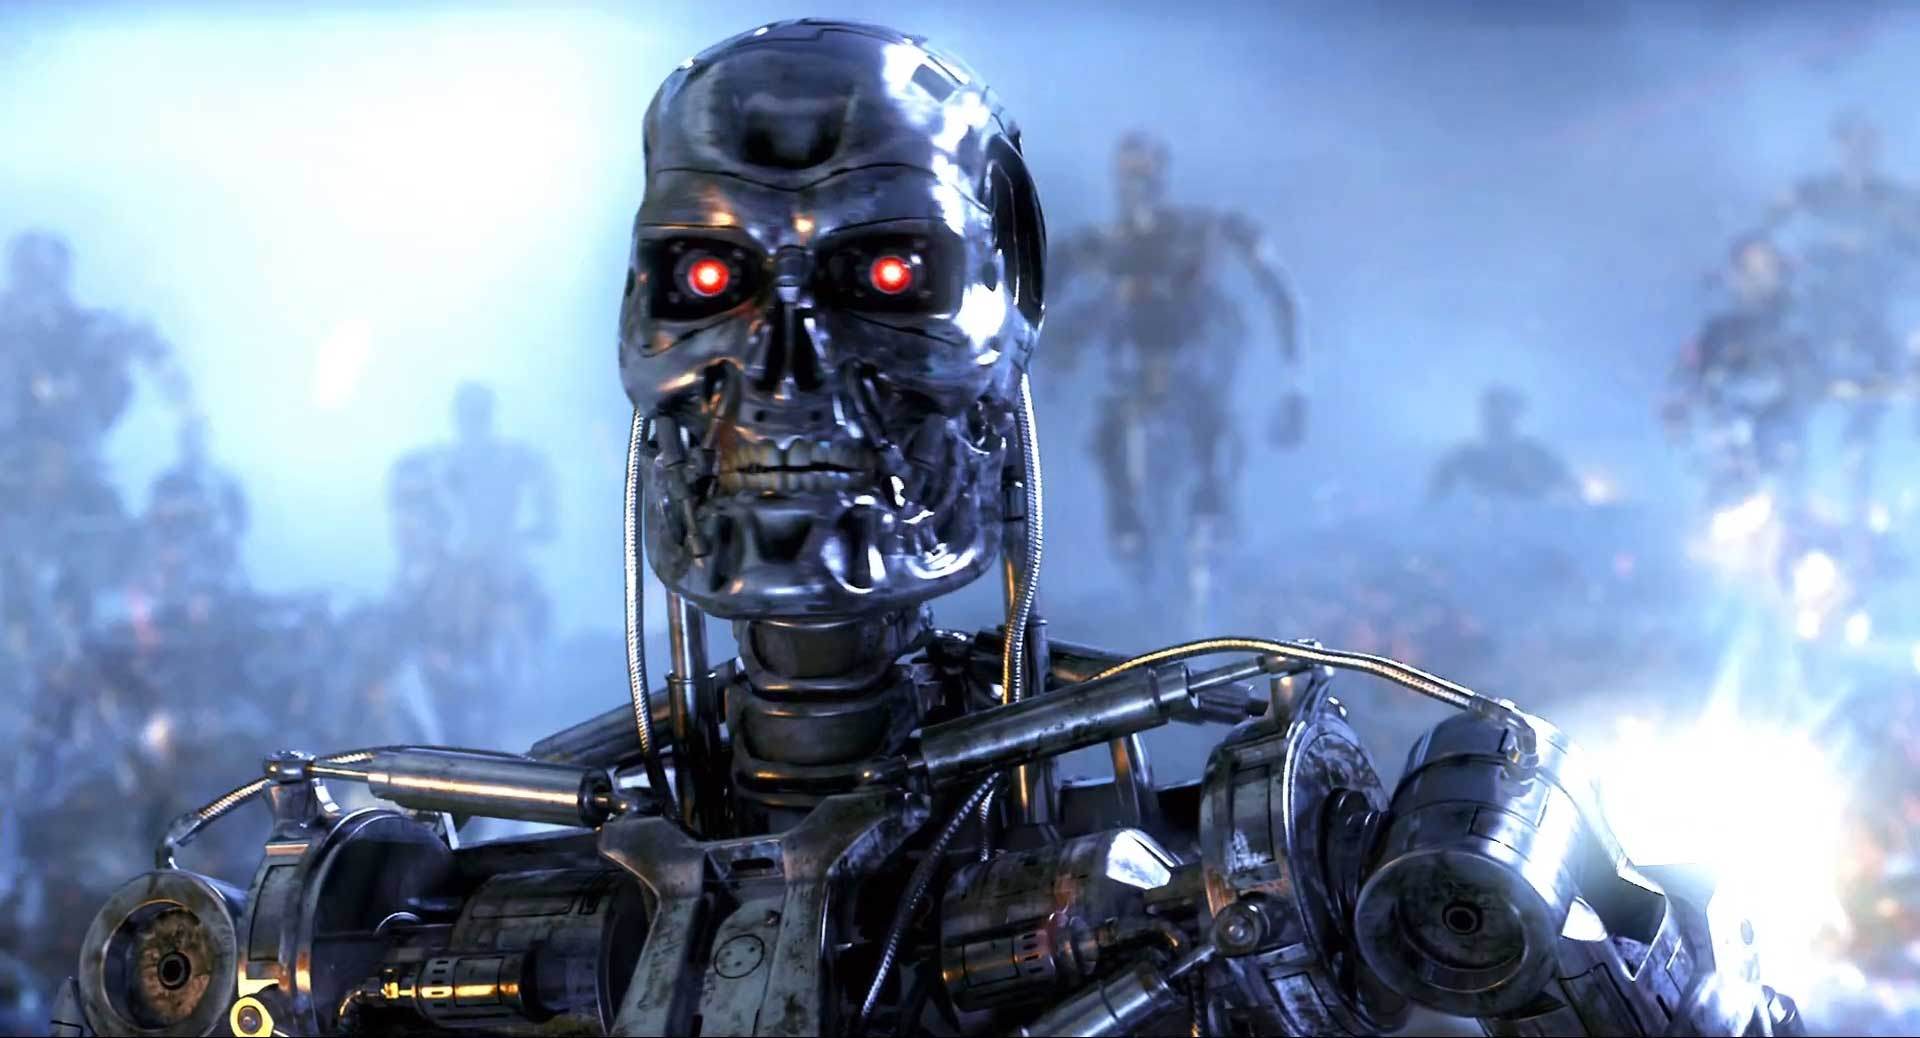 Terminator 3: Rise of the Machines Download | MadDownload.com